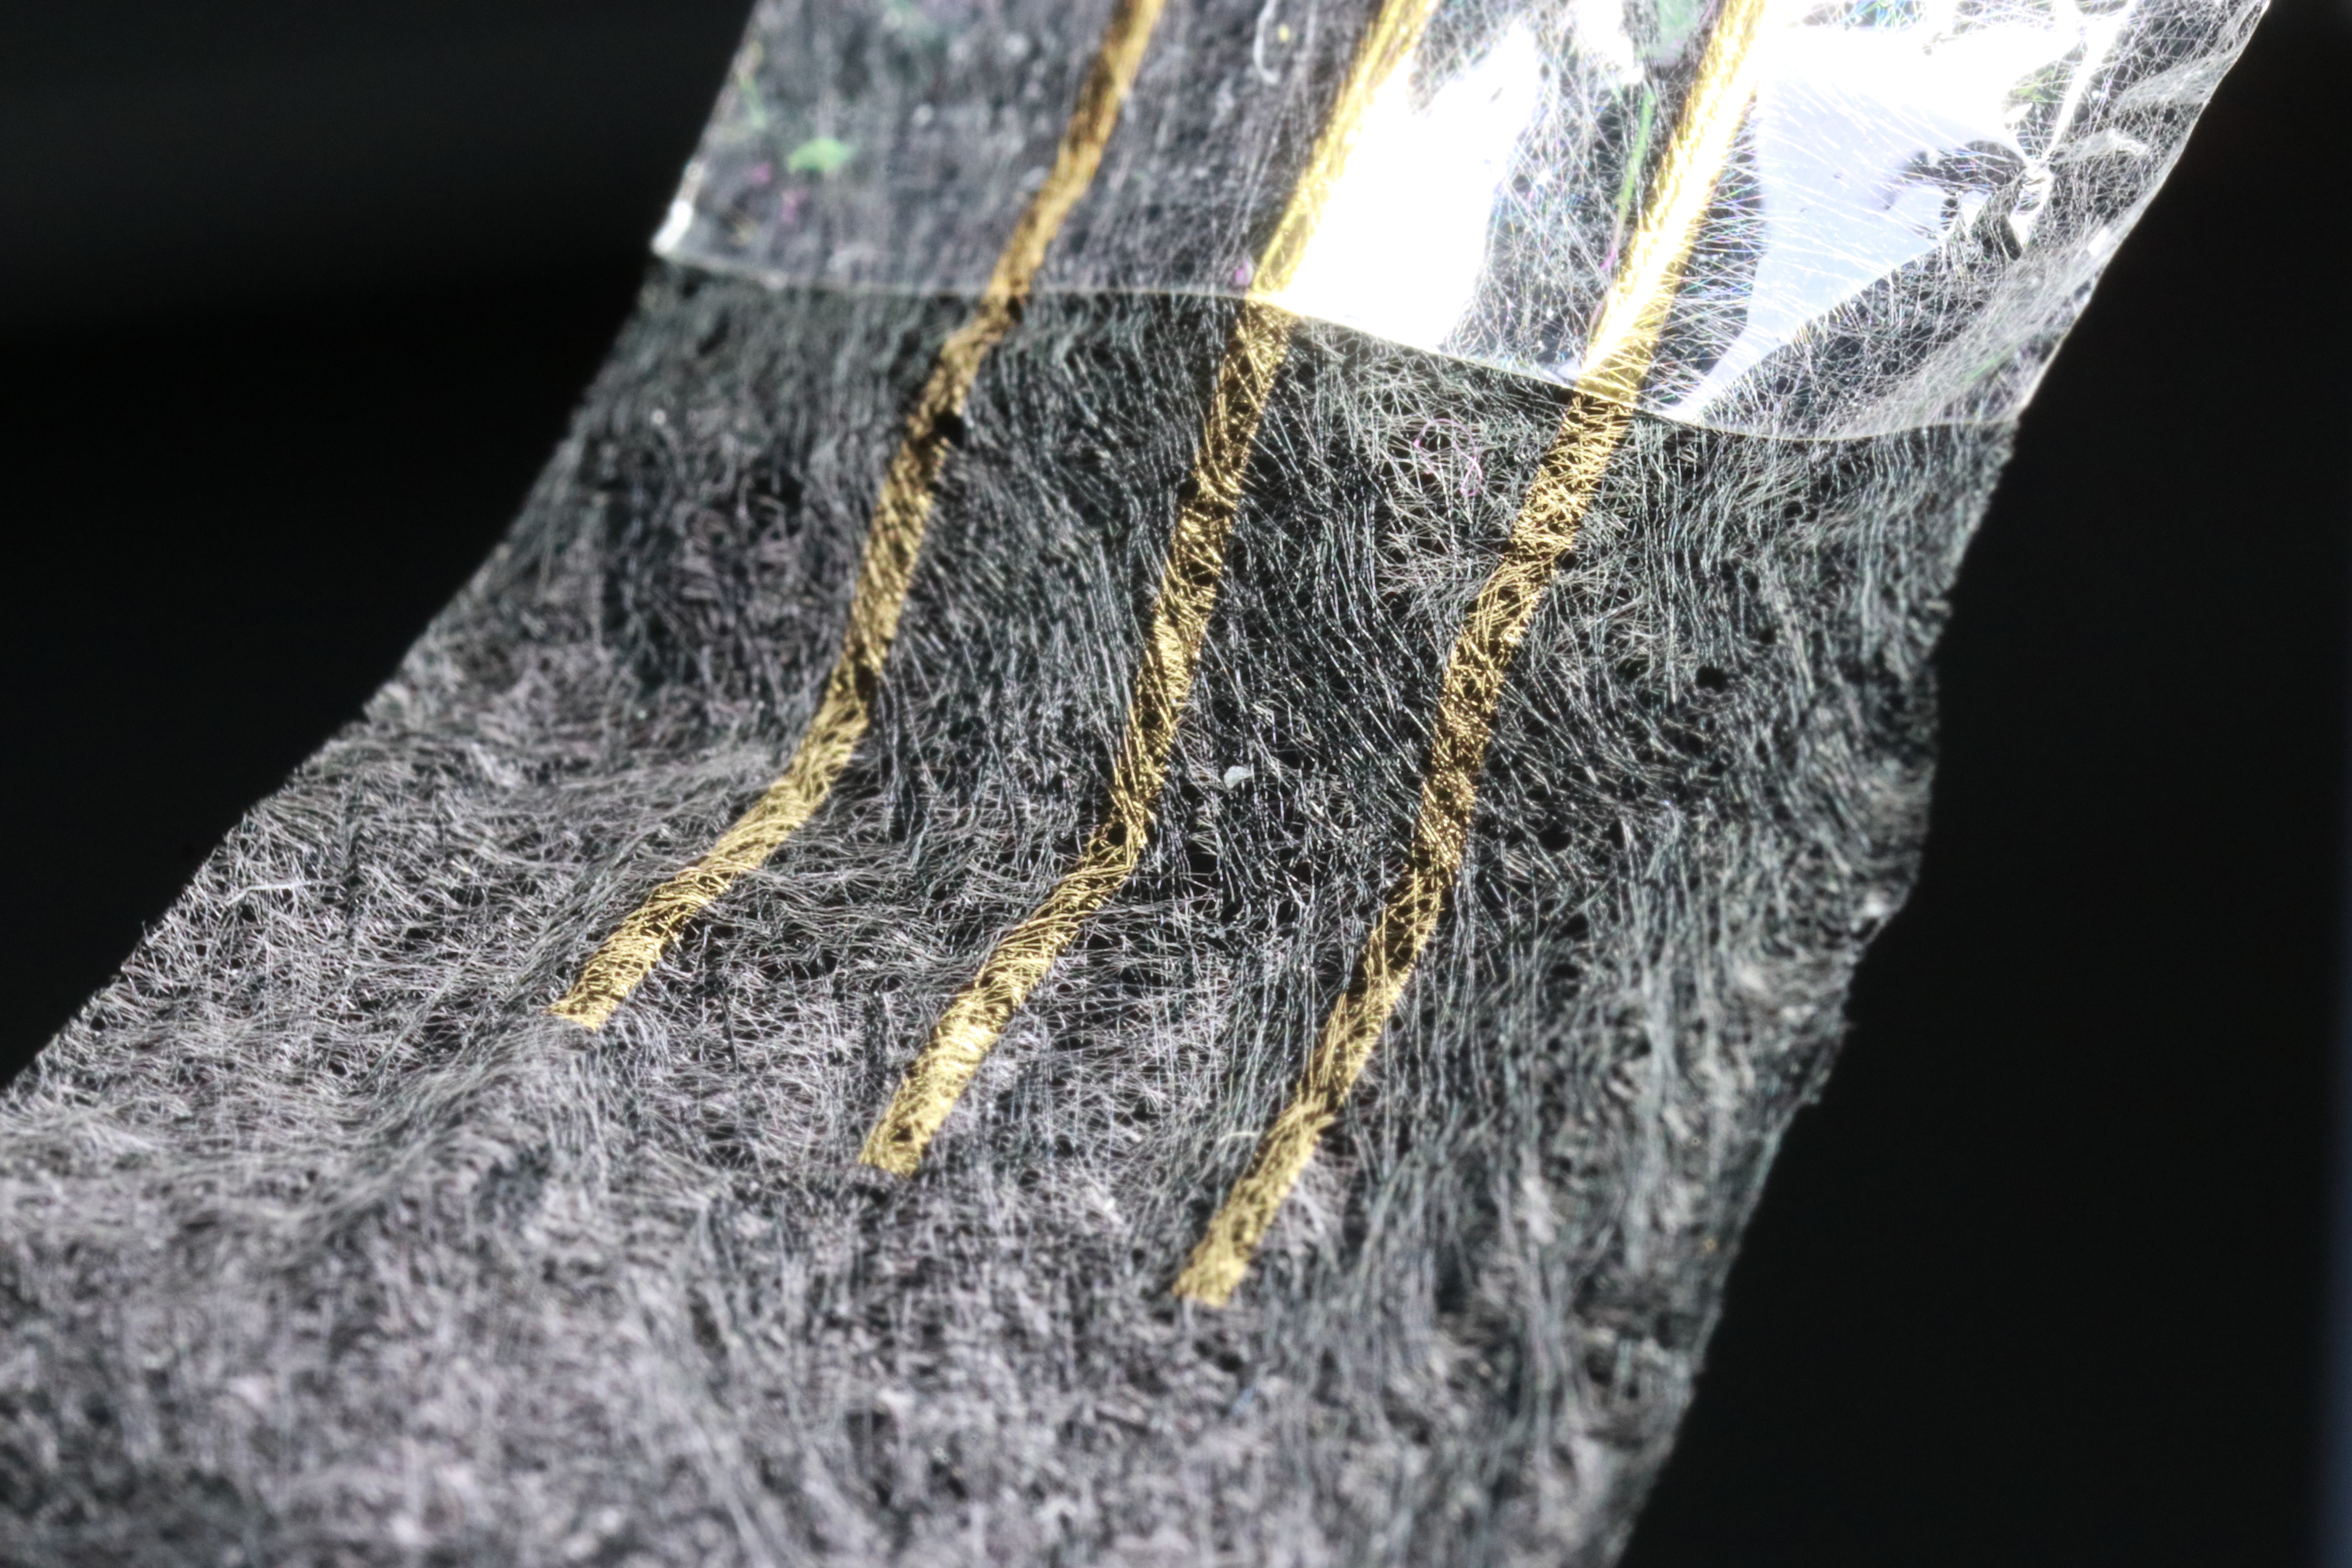 A thin white mesh of fibers on a black background. Small areas of the mesh are colored gold.